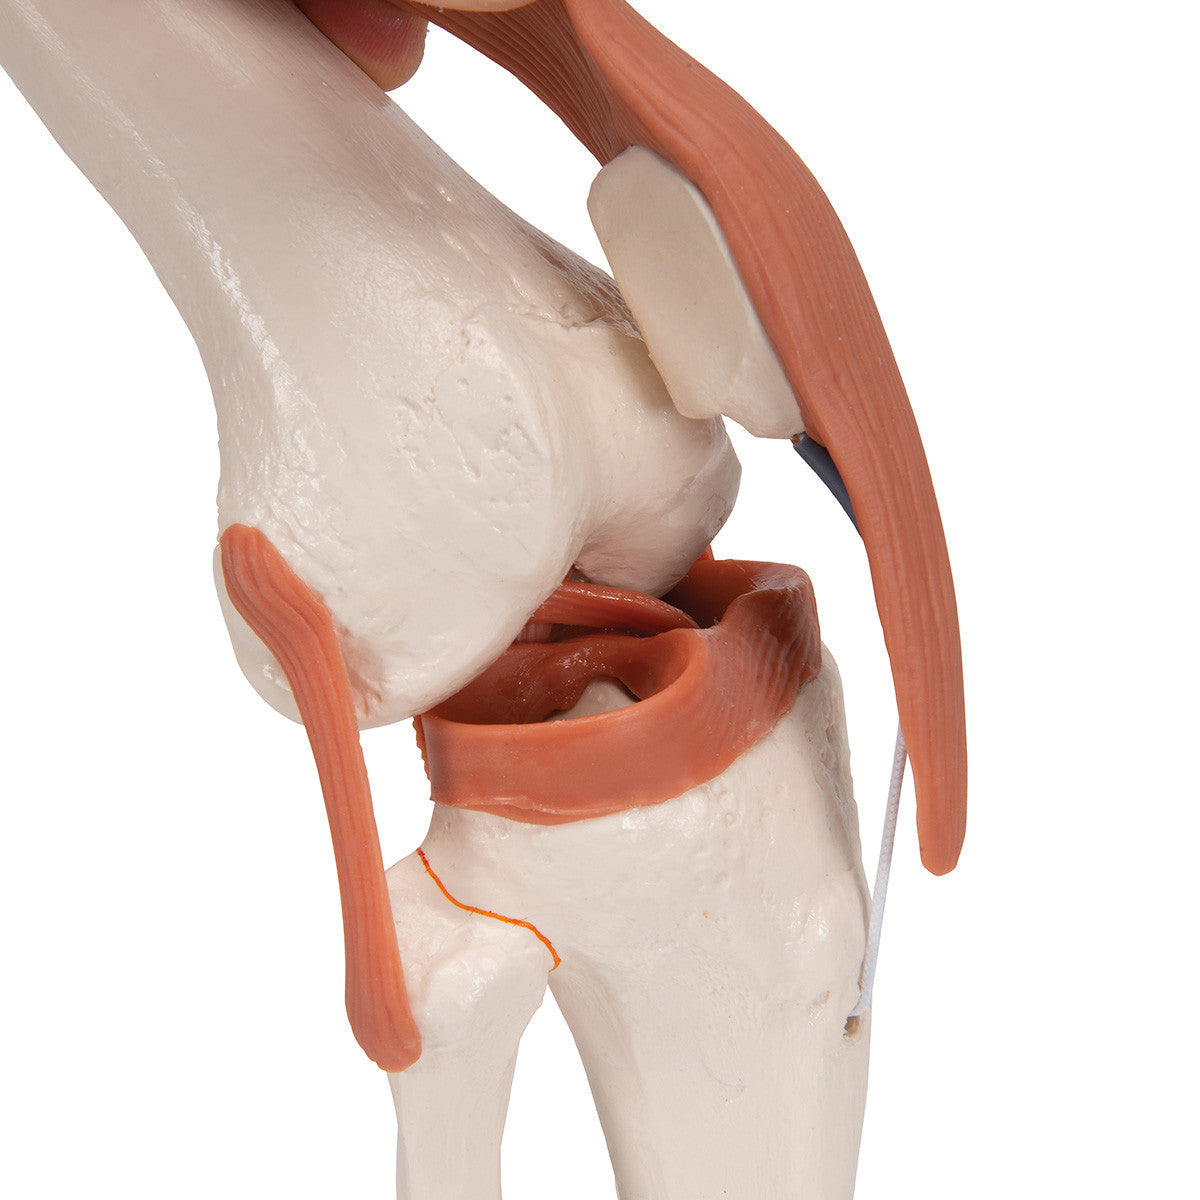 a82_07_1200_1200_functional-human-knee-joint-model-with-ligaments-3b-smart-anatomy__02744.1589753315.1280.1280.jpg